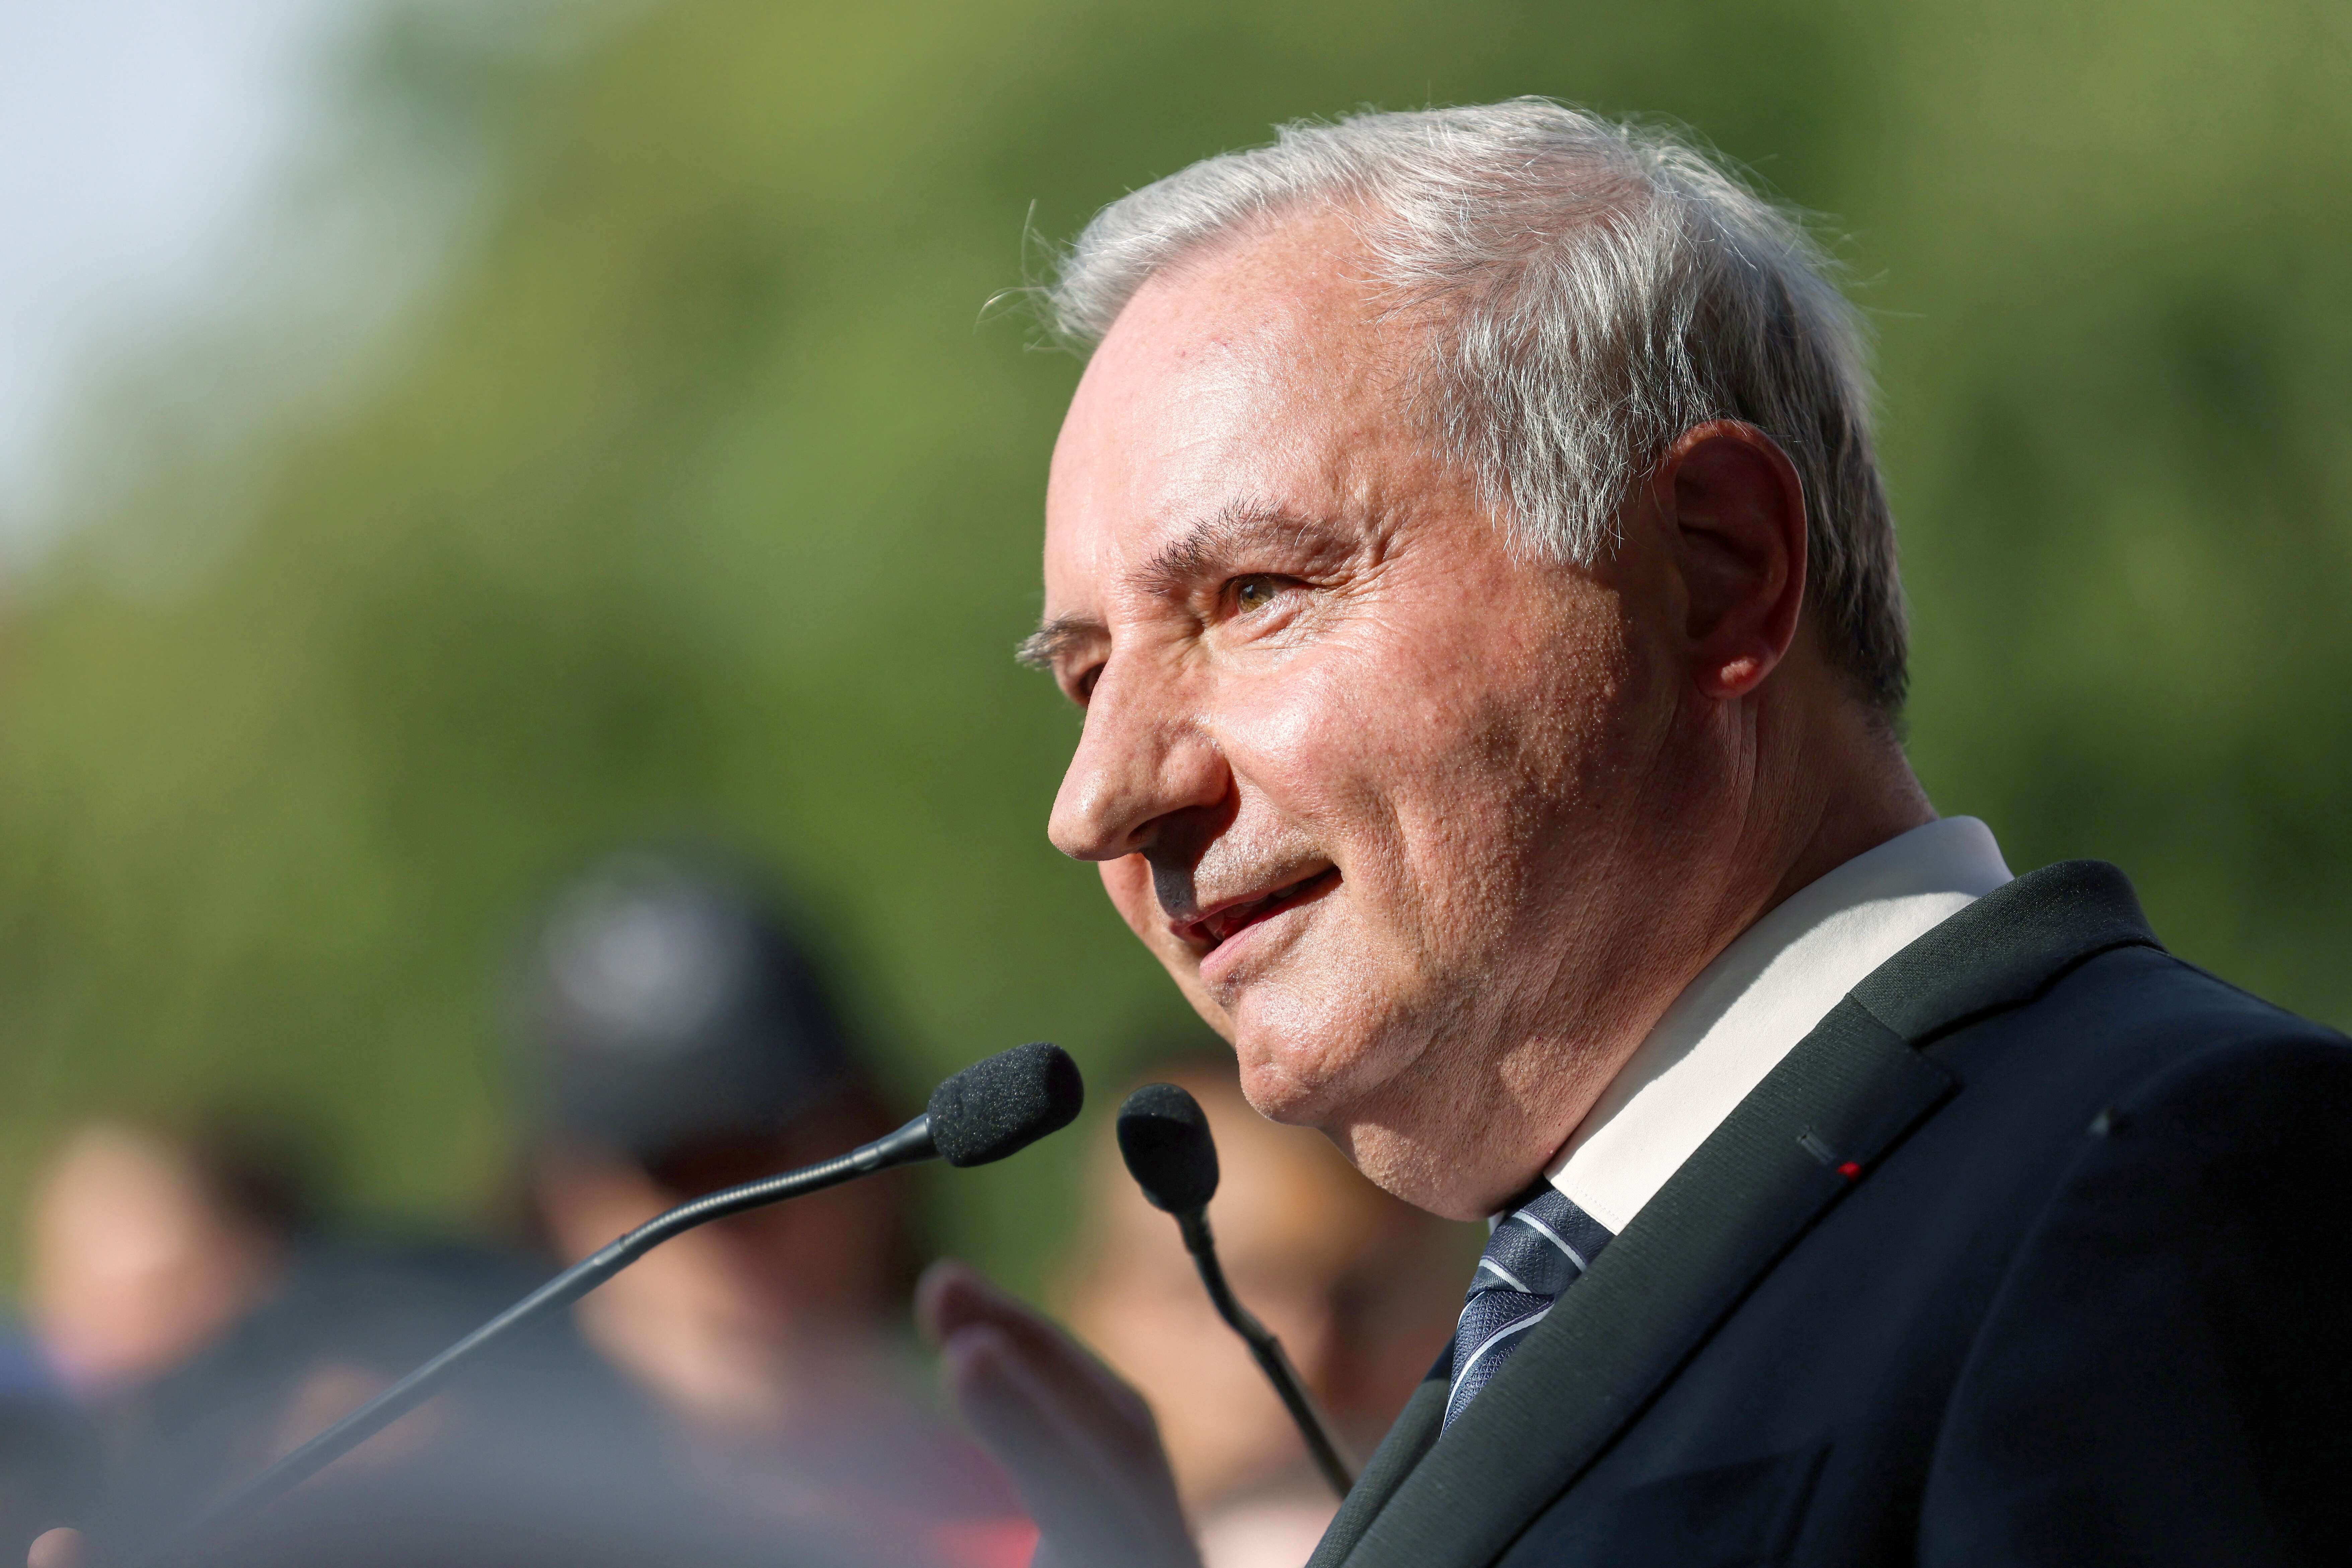 Mayor of Toulouse Jean-Luc Moudenc delivers a speech during the inauguration of the Jules Geraud Saliege school in Toulouse, southern France, on September 1, 2022. (Photo by Charly TRIBALLEAU / AFP)